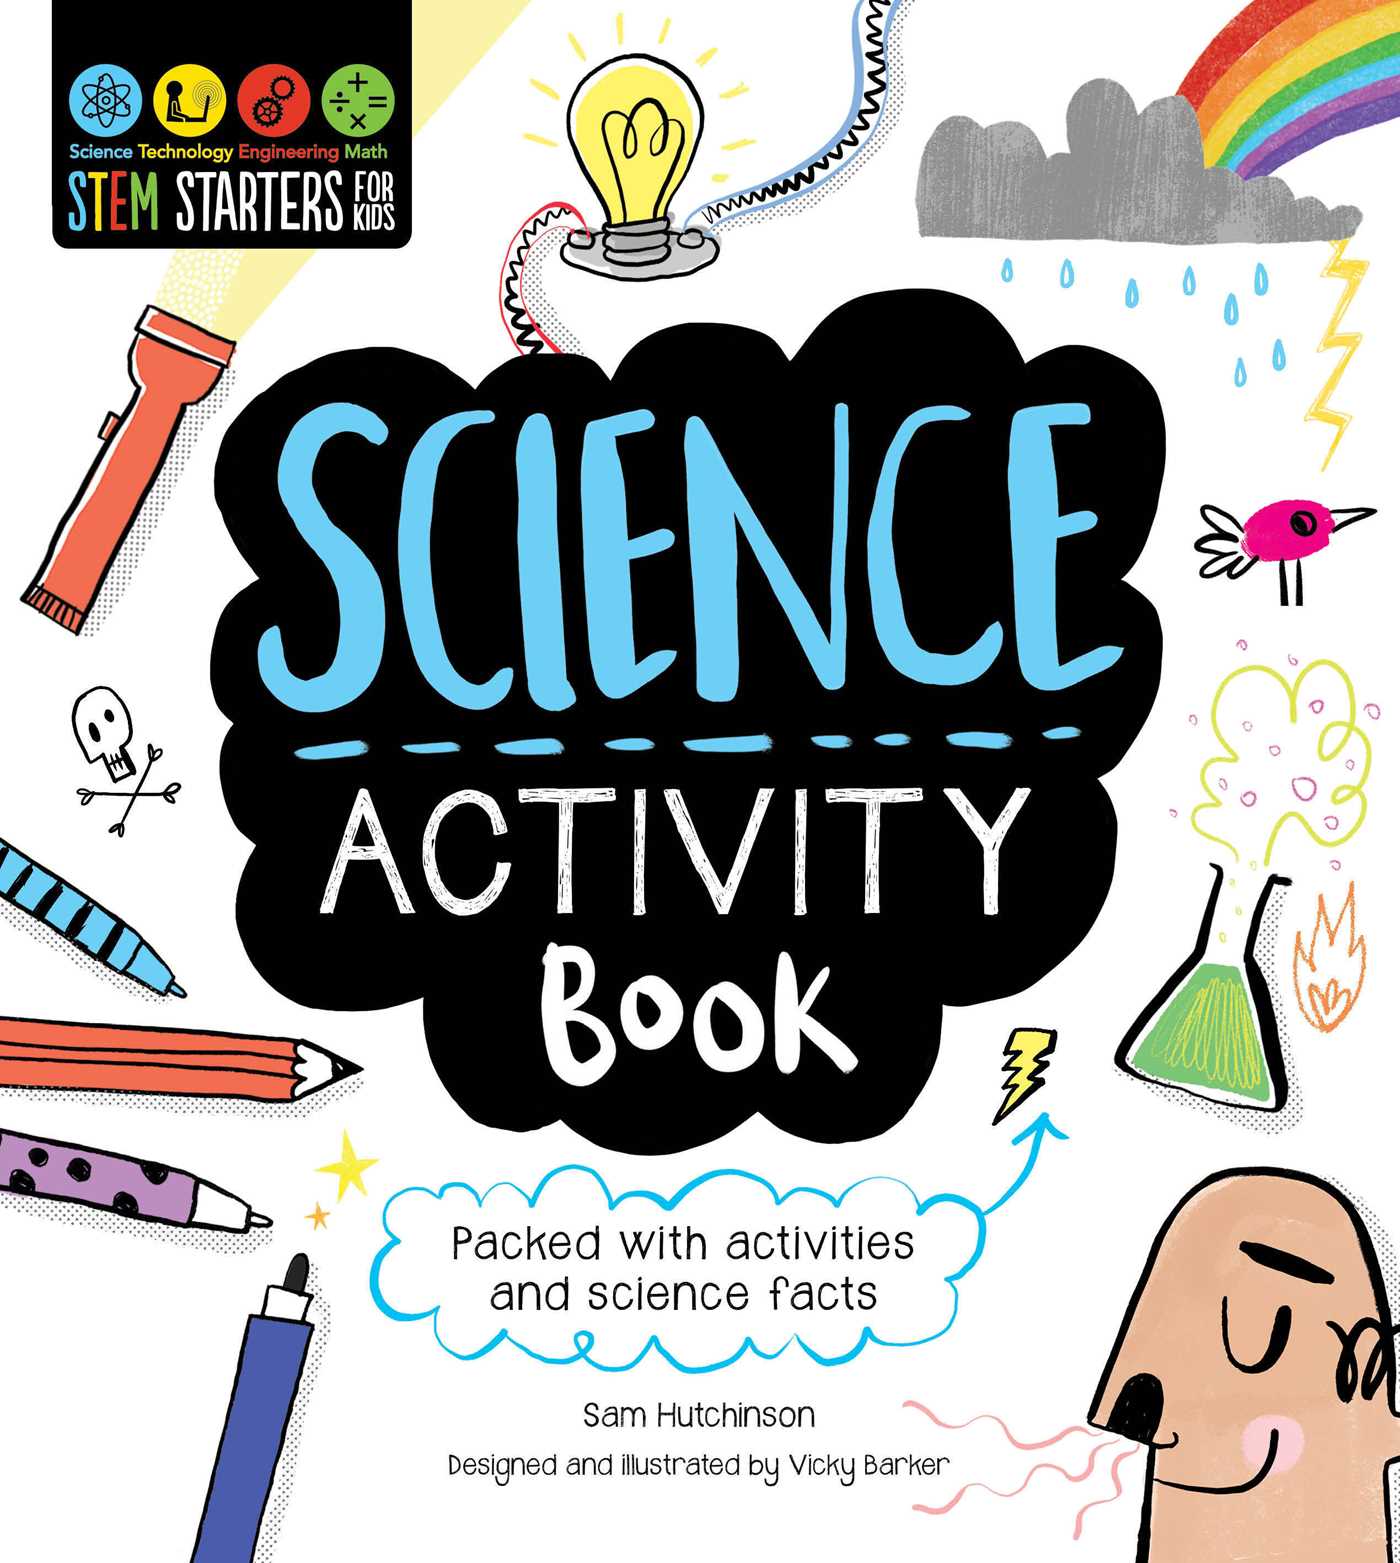 Stem starters for kids. Clipart science science activity